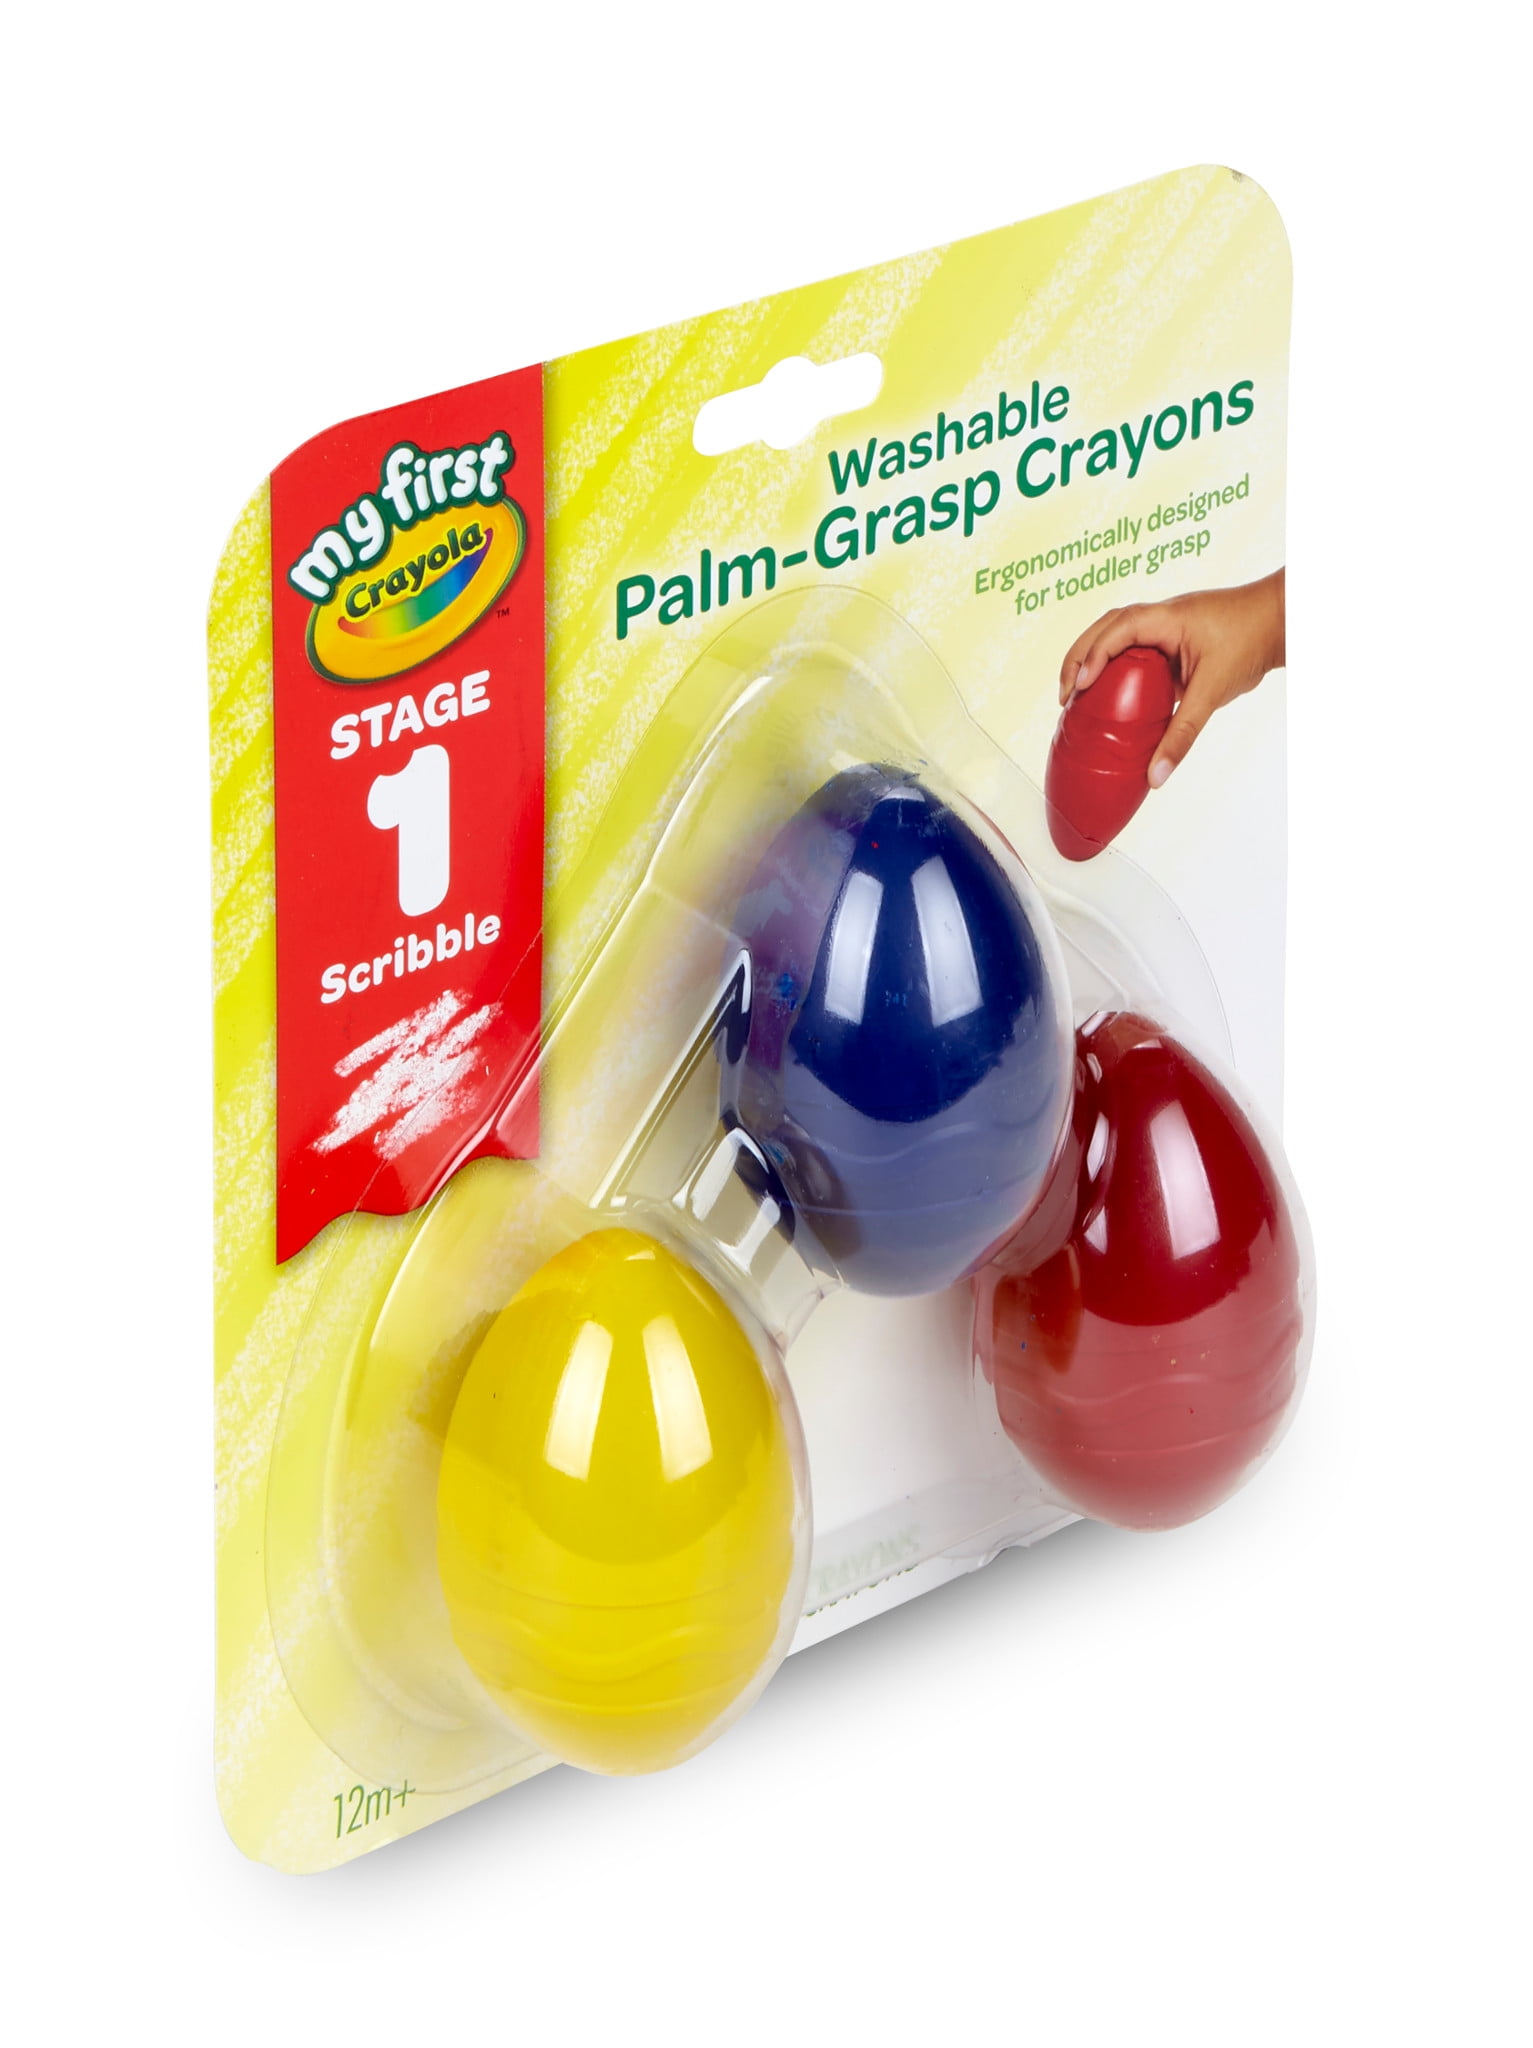 Crayola My First Washable Palm Grasp Crayons, Assorted Colors, Set of 3 